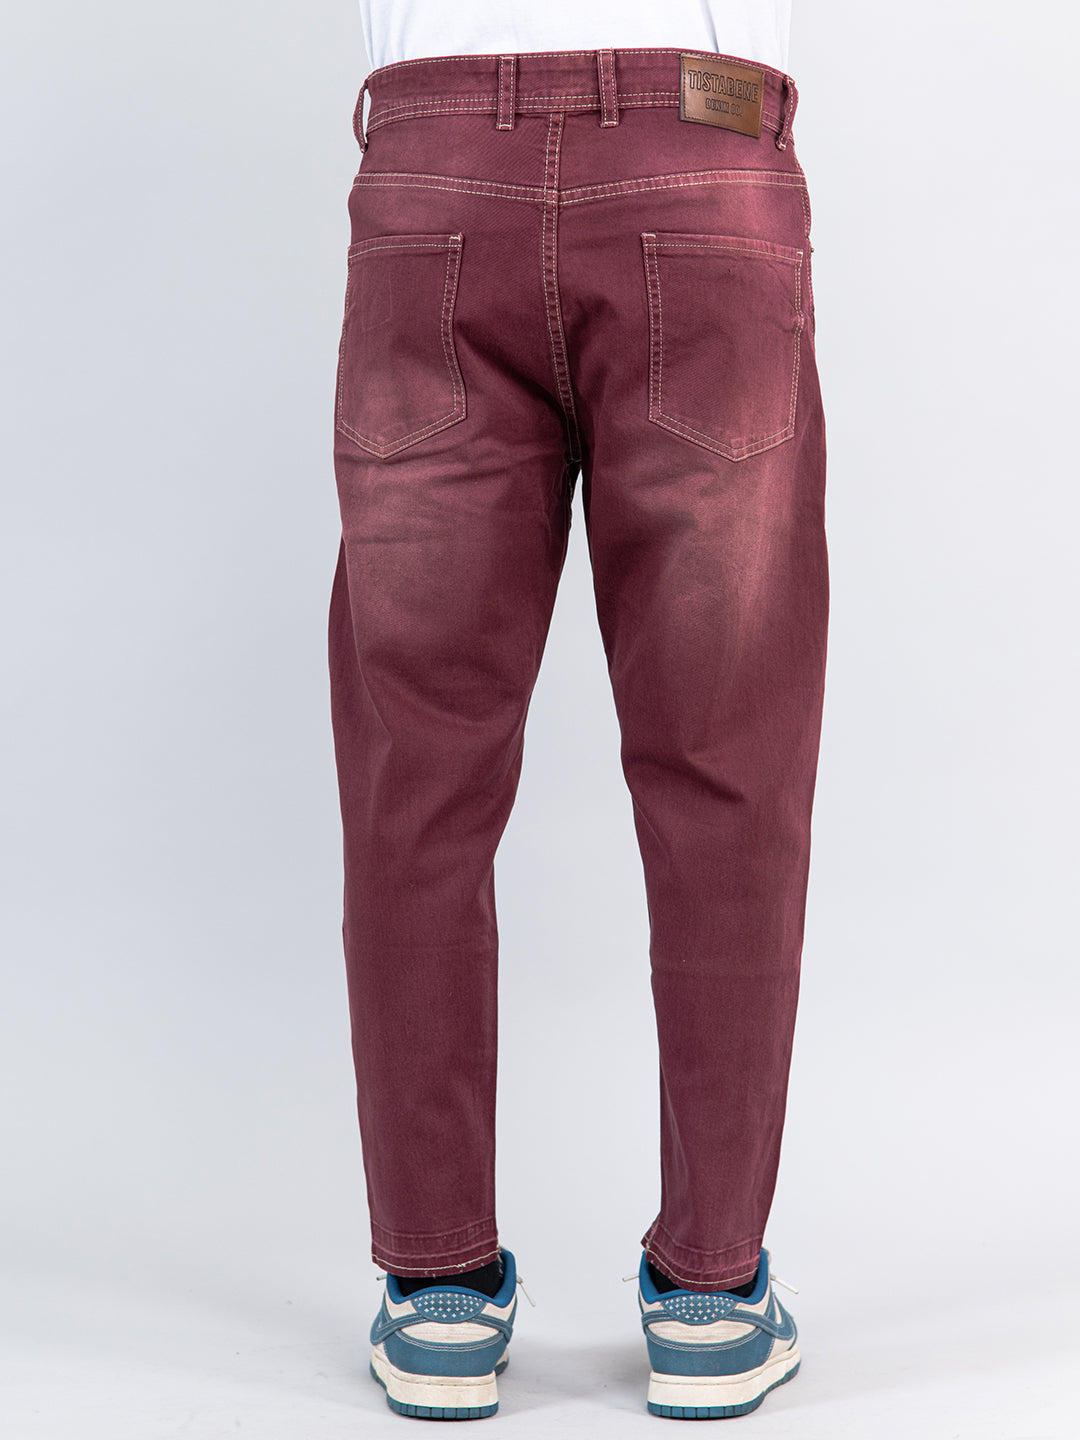 Buy Maroon Ripped Cropped Slim Fit Mens Jeans Online | Tistabene - Tistabene